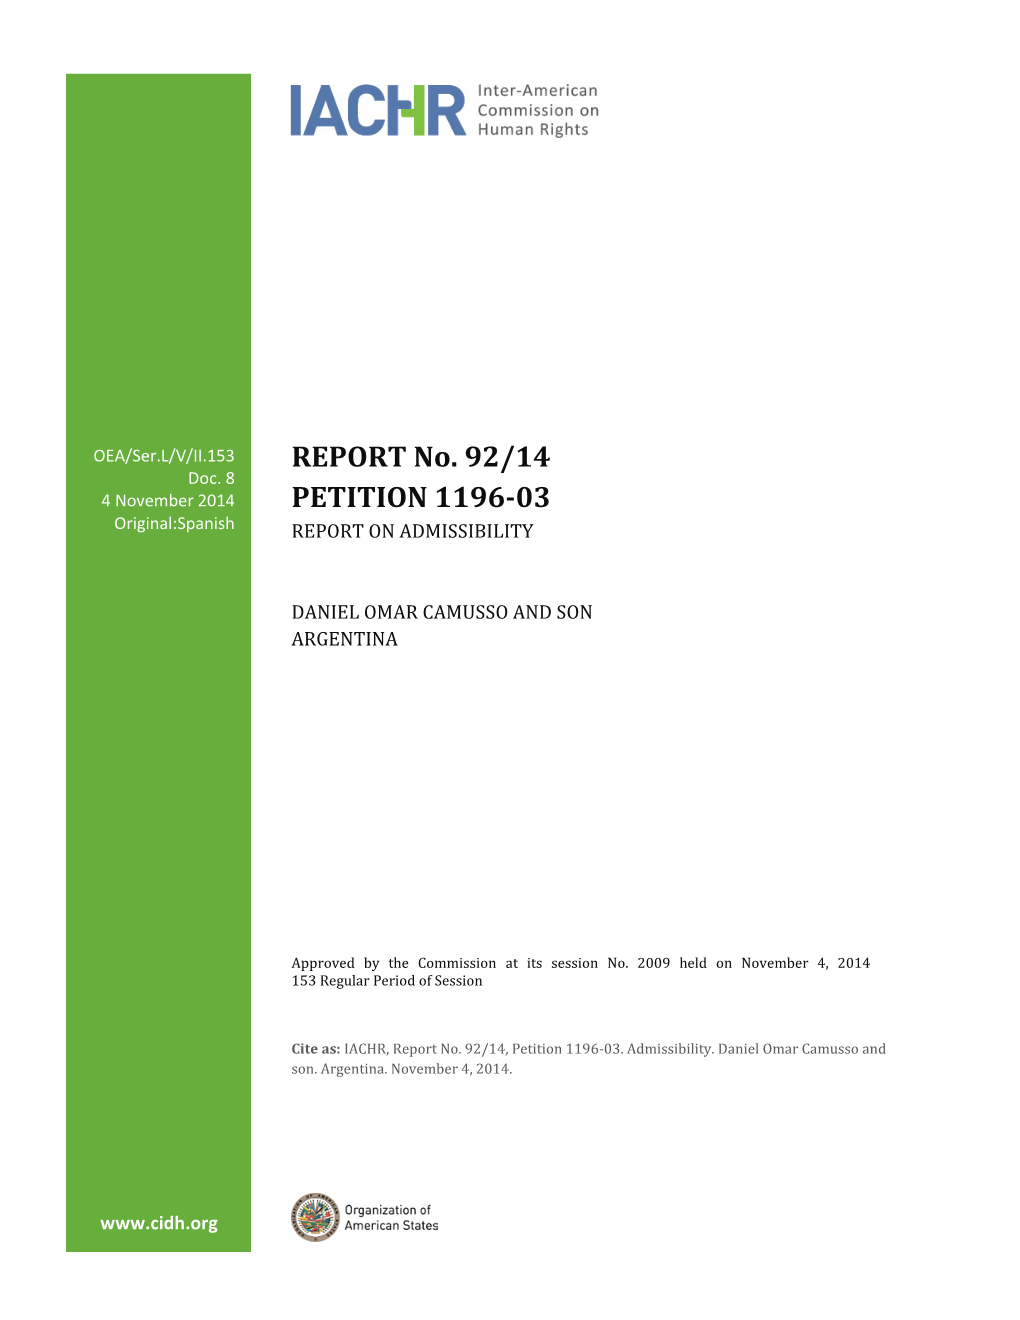 REPORT No. 92/14 PETITION 1196-03